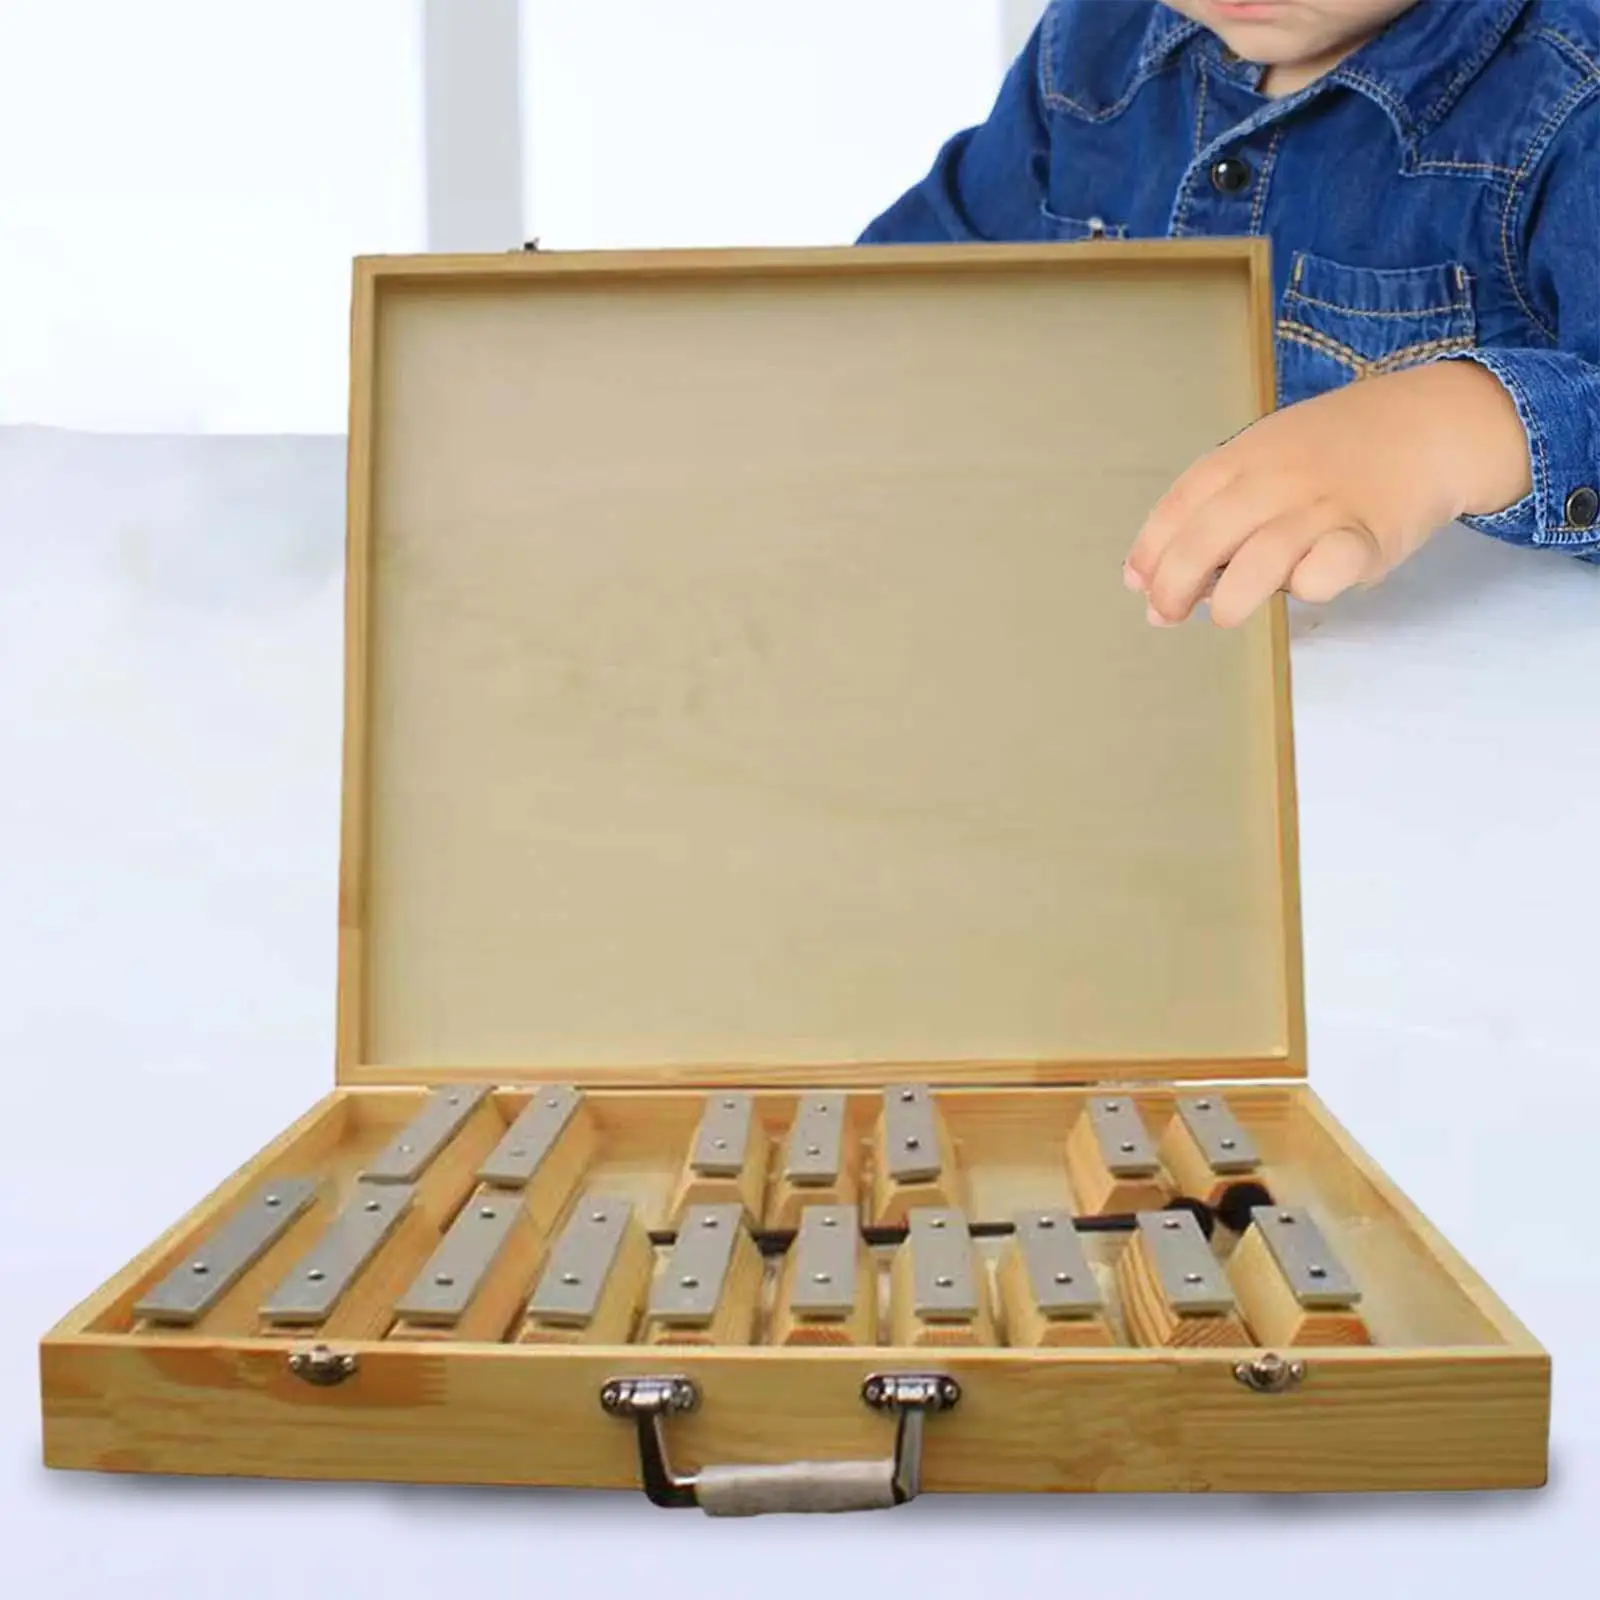 17 Notes Glockenspiel Xylophone Development Toy Musical Percussion Instrument Birthday Gifts Montessori Toy Xylophone for Kids